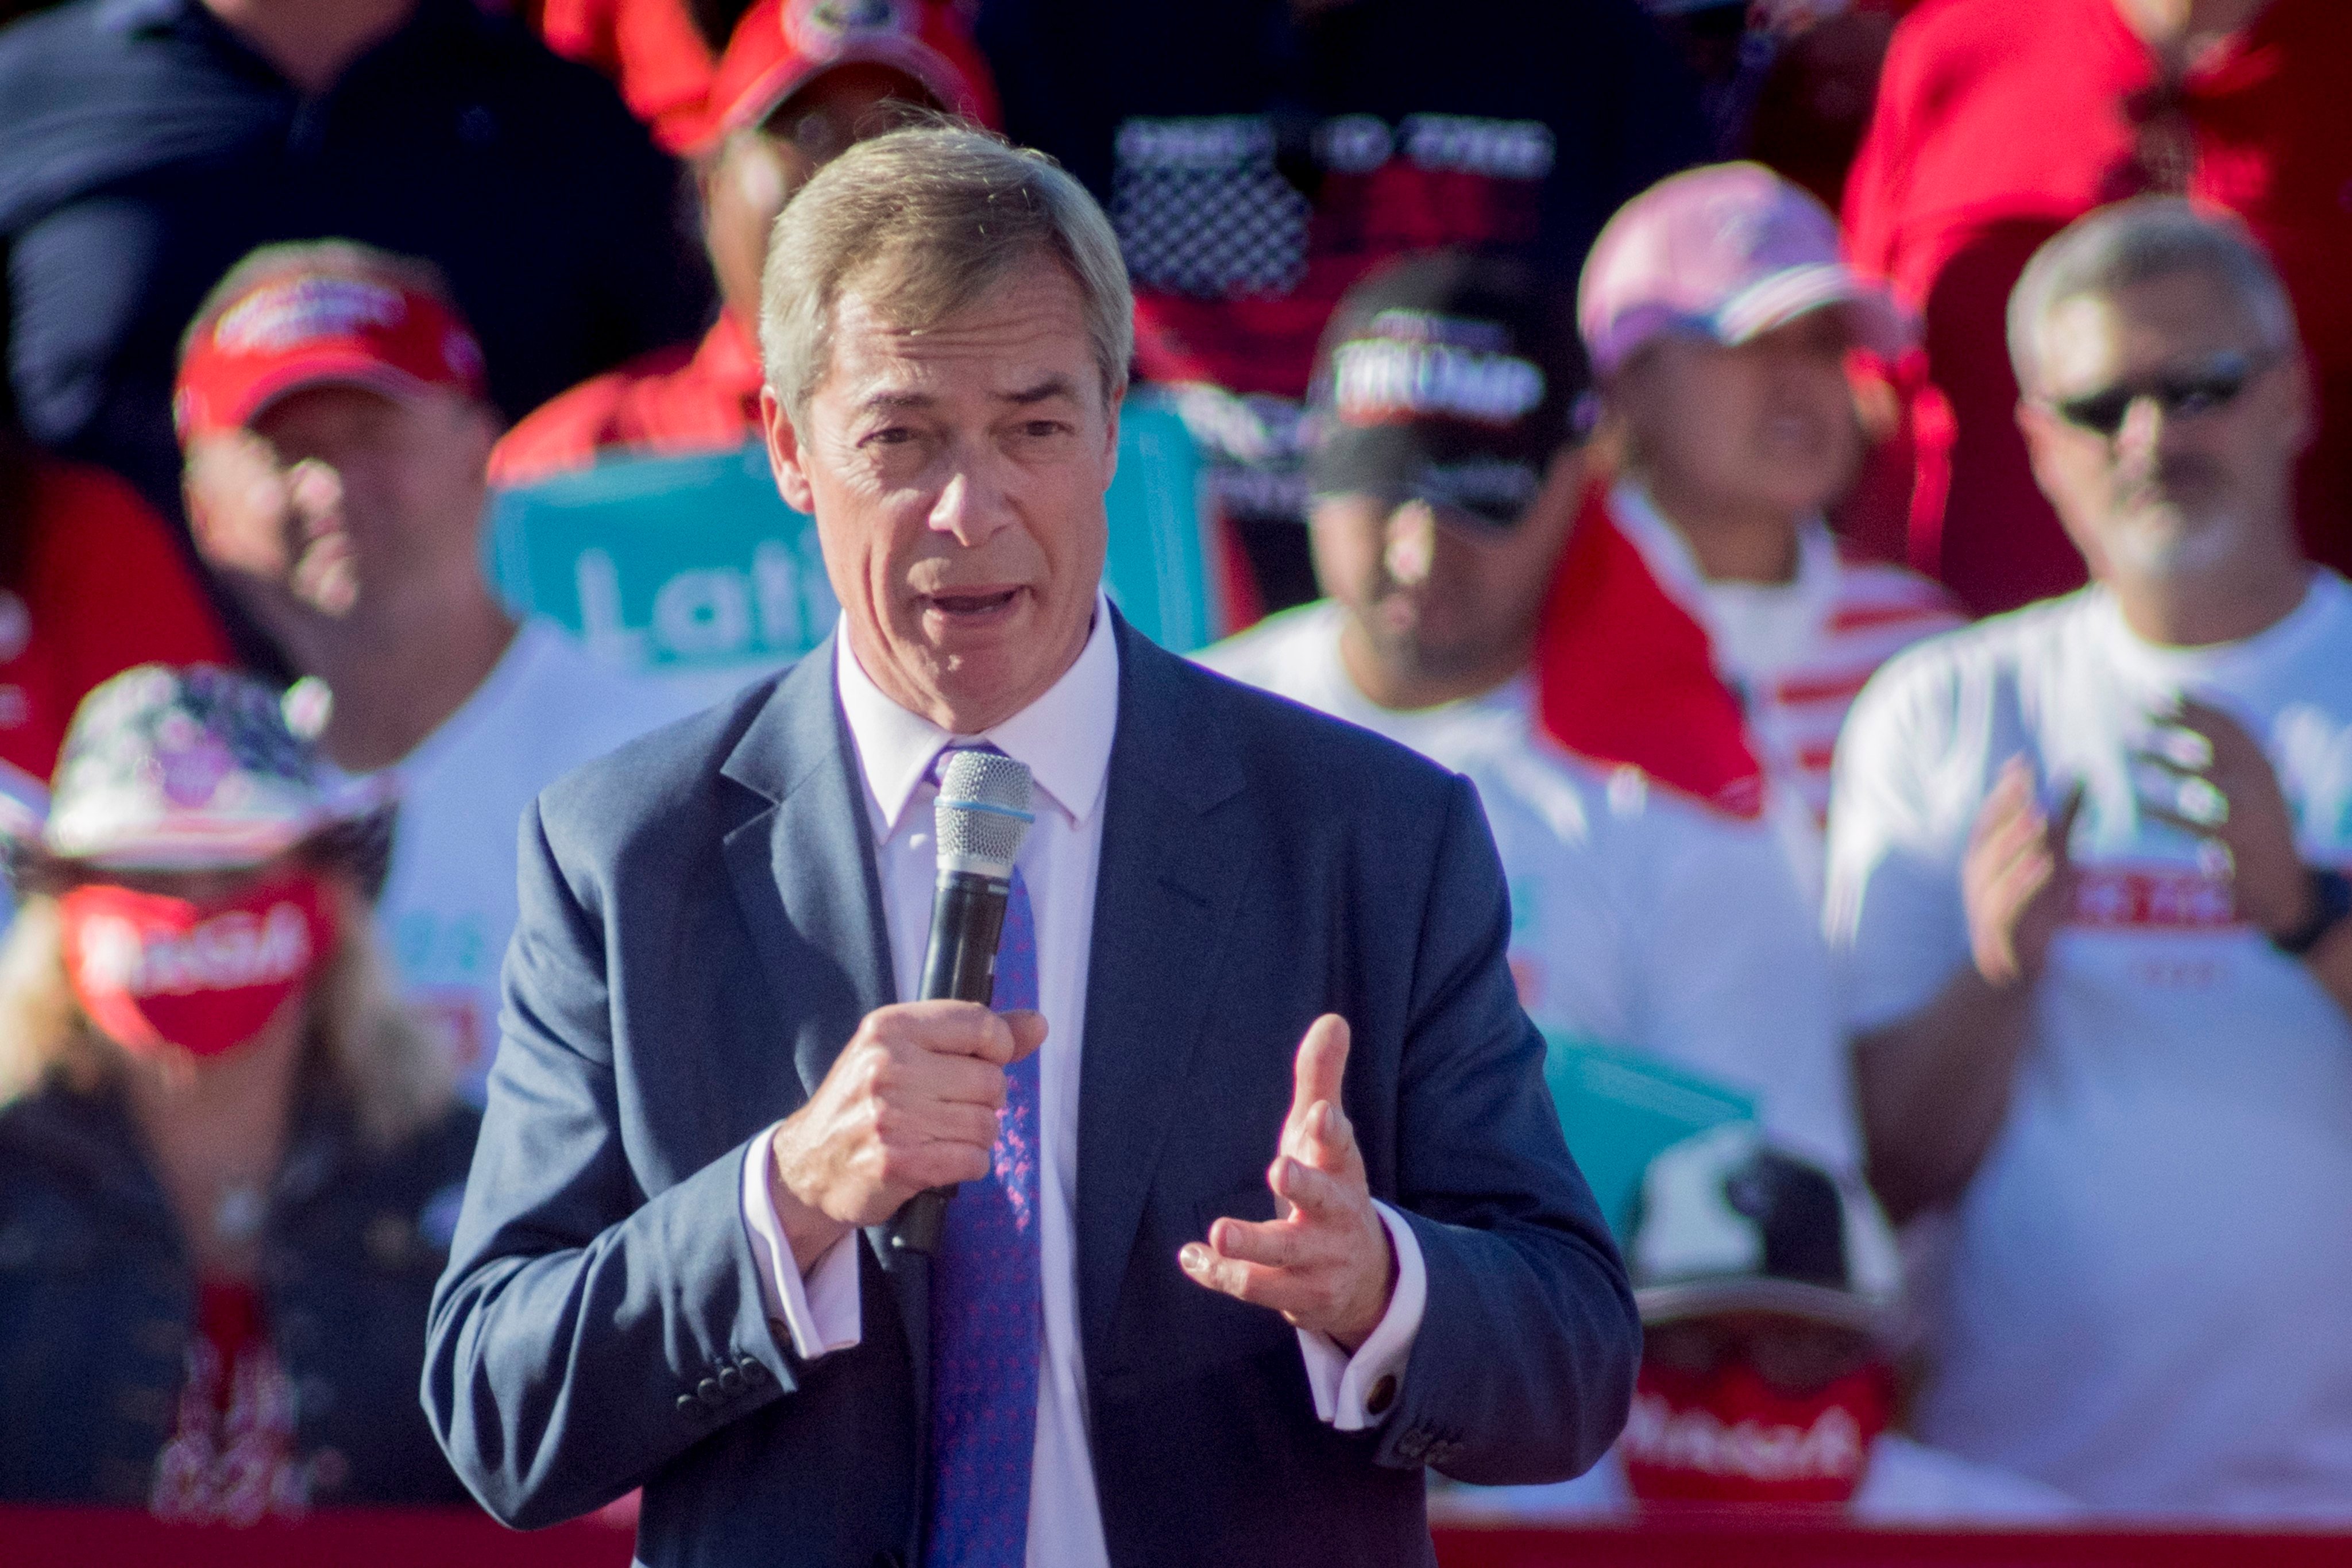 British former Brexit party leader Nigel Farage speaks at a rally for Donald Trump in Phoenix, Arizona, US in October 2020. Photo: EPA-EFE